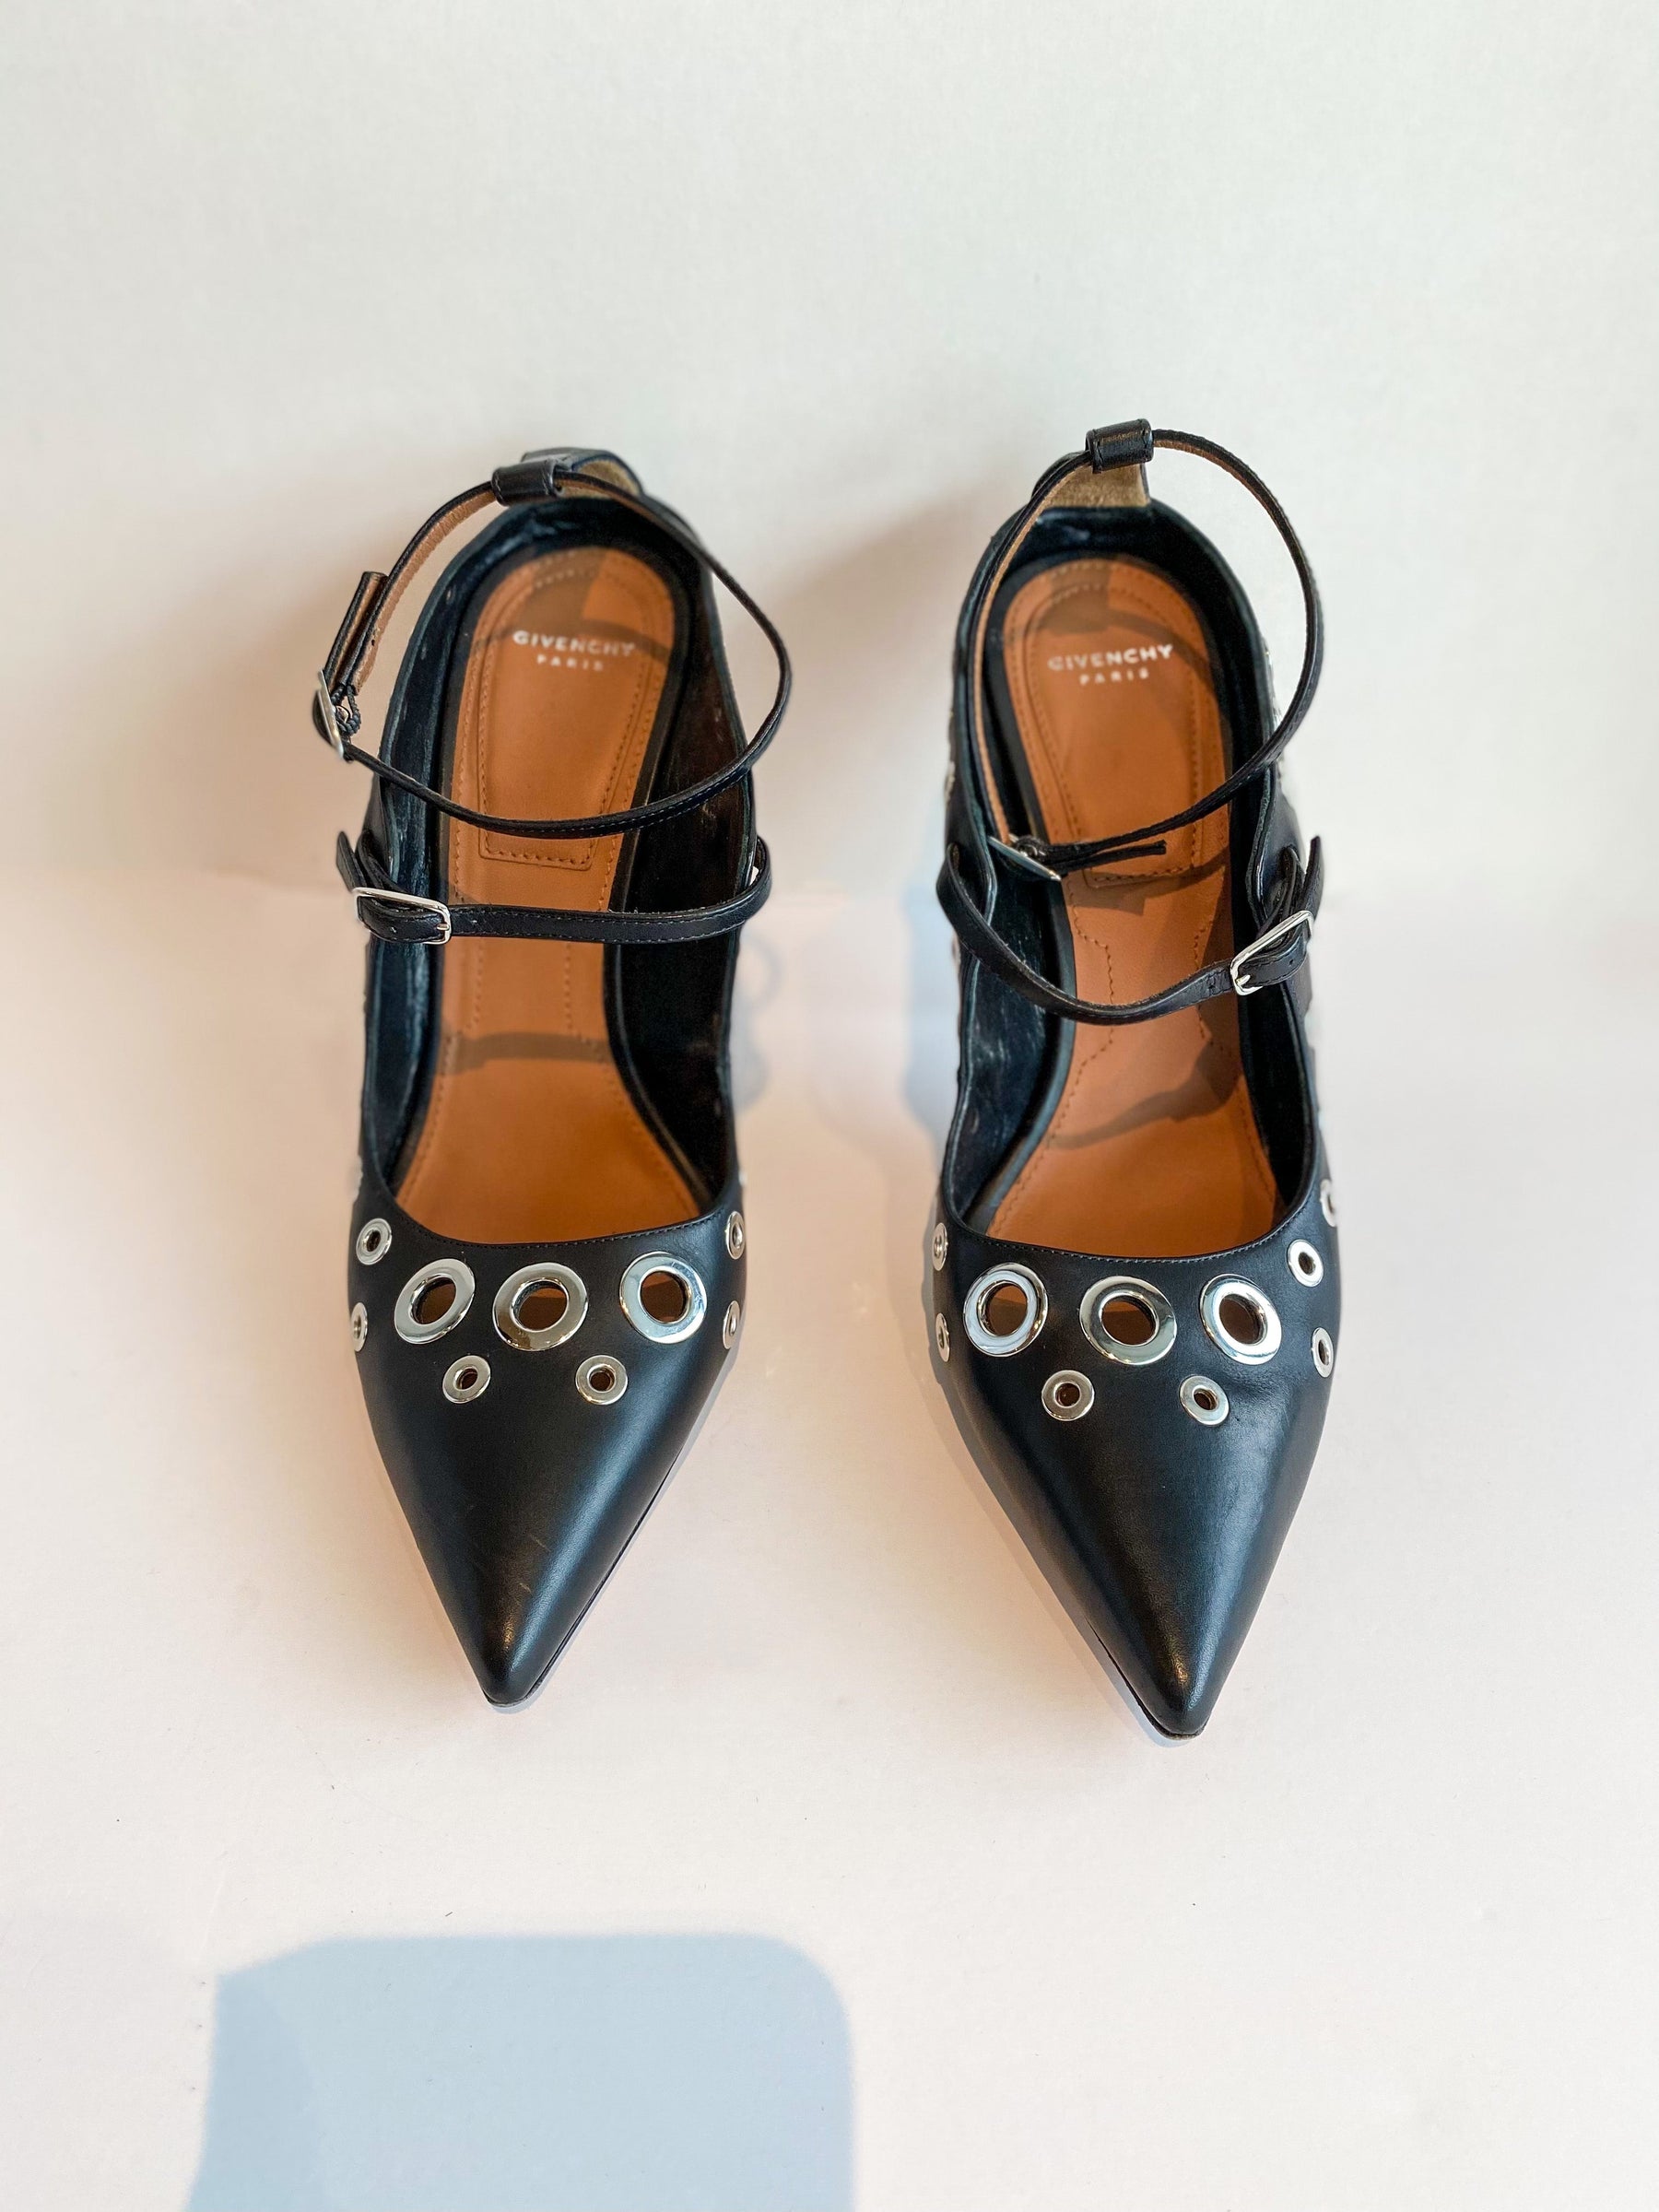 Givenchy Mary Jane Heels Black Leather Silver Circle Cutouts 